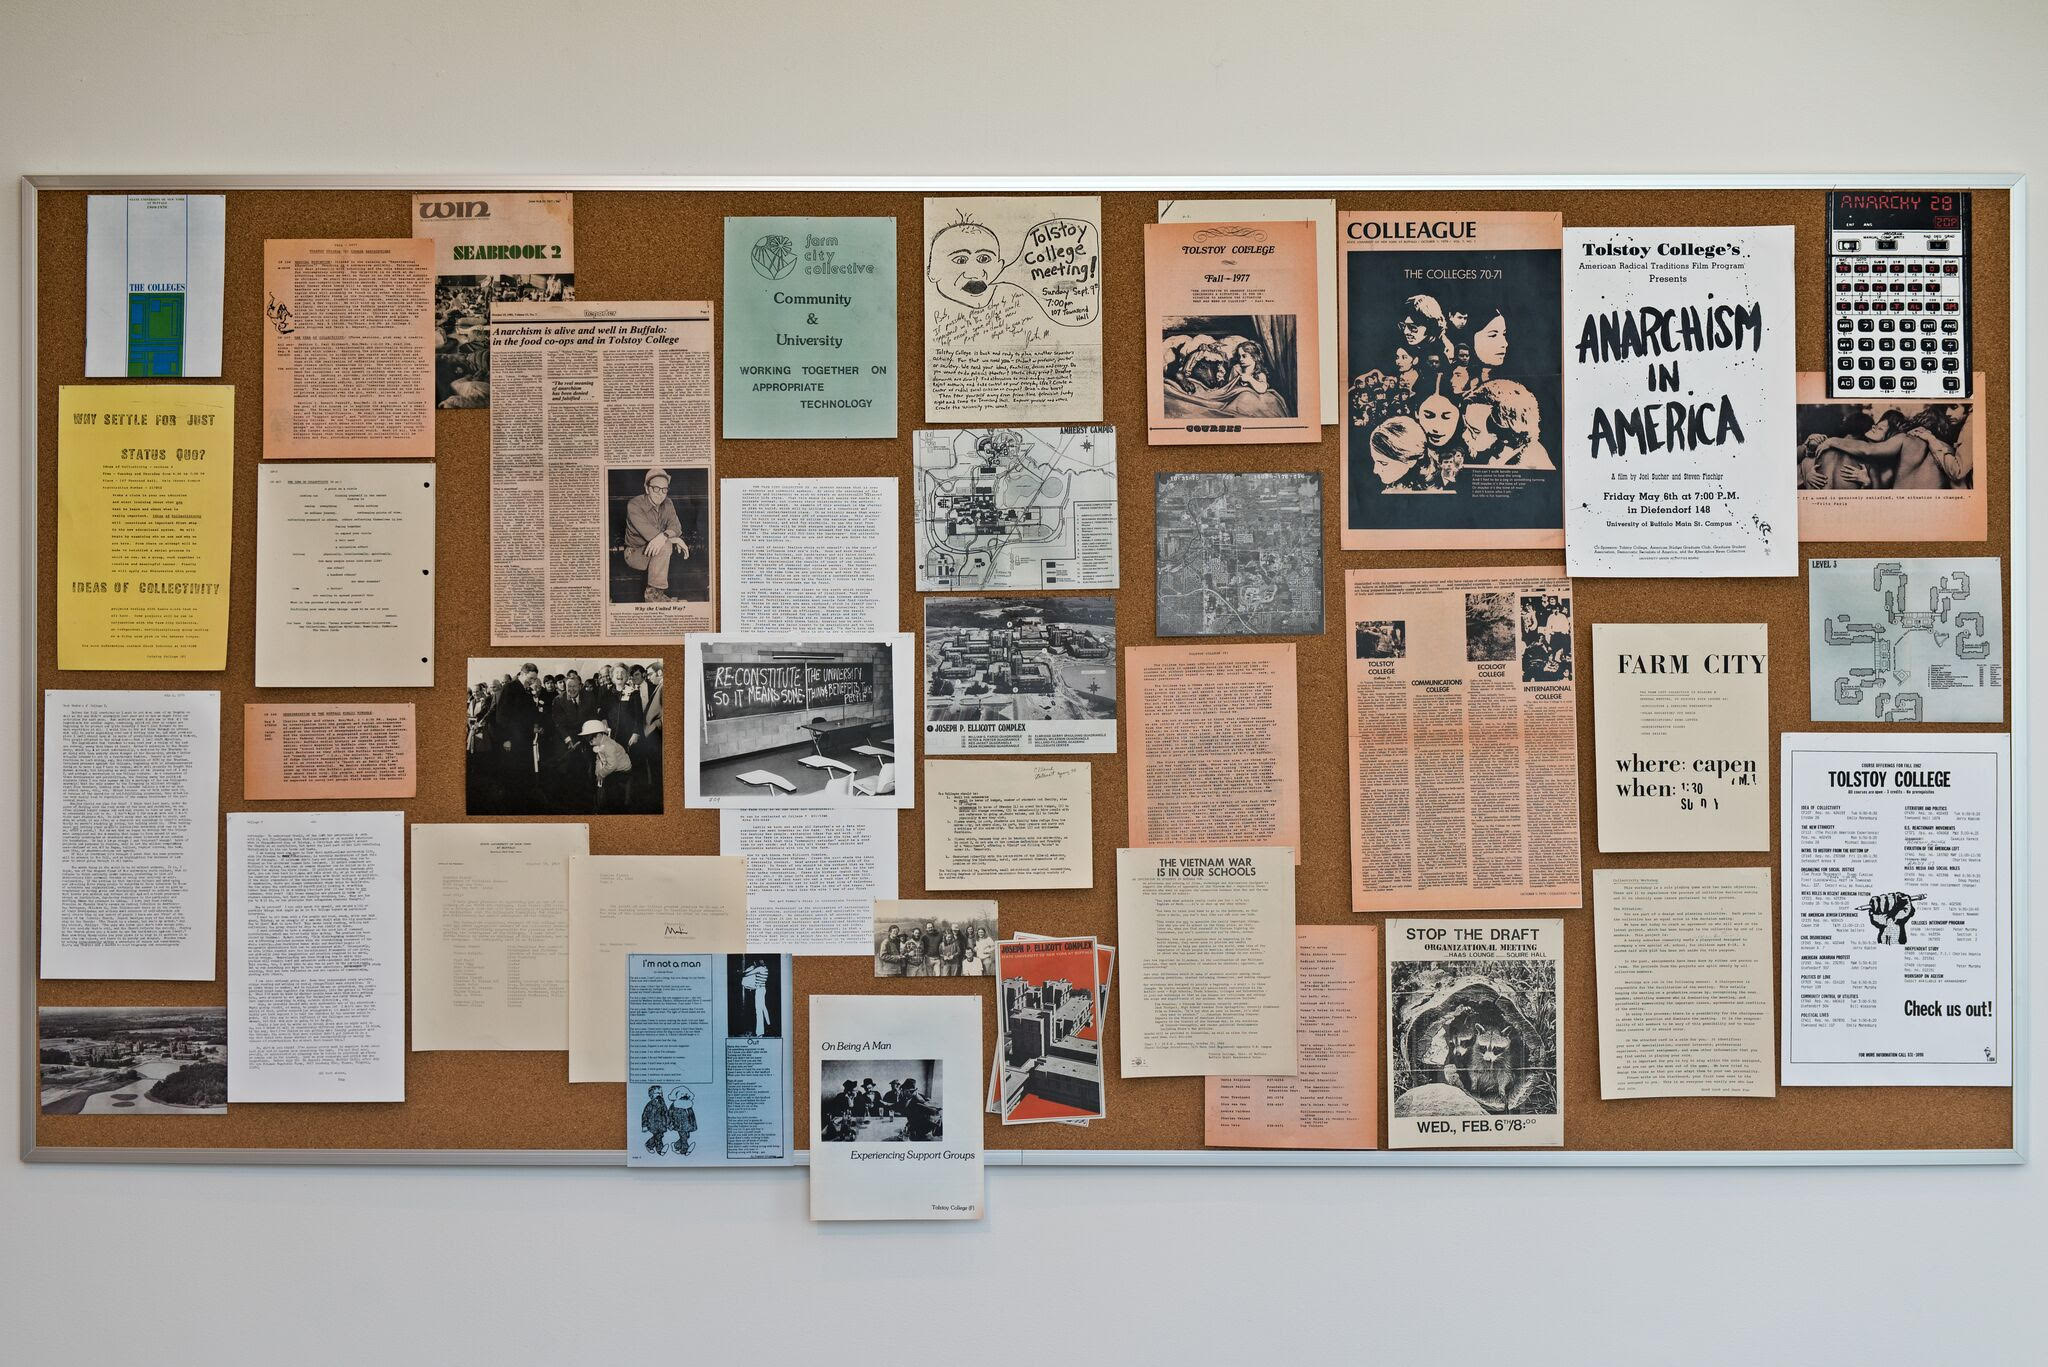 an image of a bulletin board displaying many pieces of ephemera collected from the University of Buffalo Archives on Tolstoy College